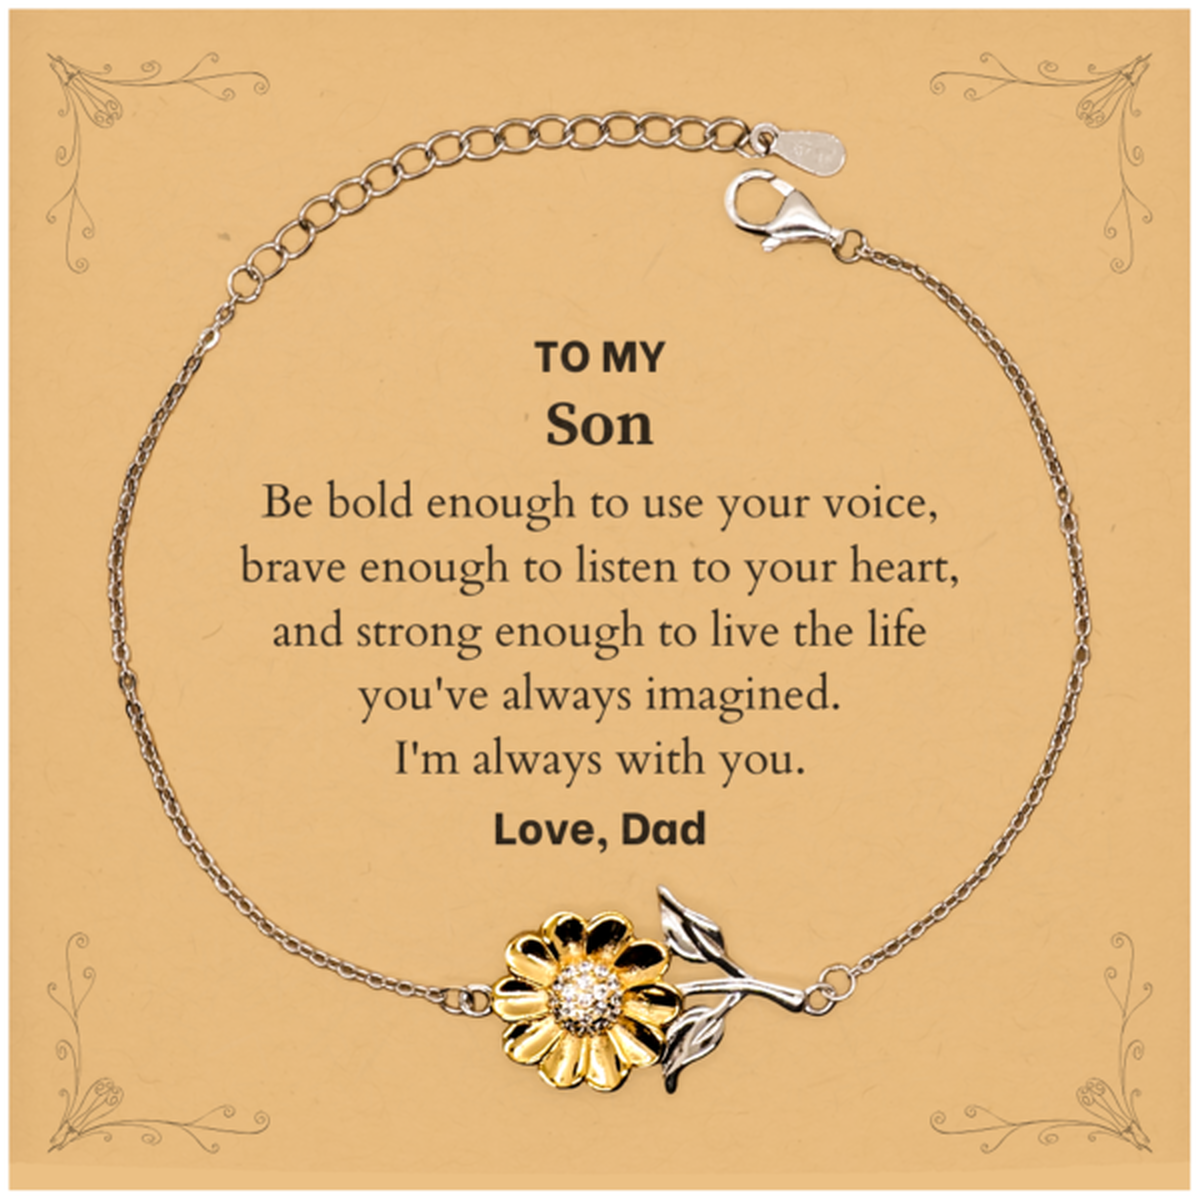 Keepsake Son Sunflower Bracelet Gift Idea Graduation Christmas Birthday Son from Dad, Son Be bold enough to use your voice, brave enough to listen to your heart. Love, Dad